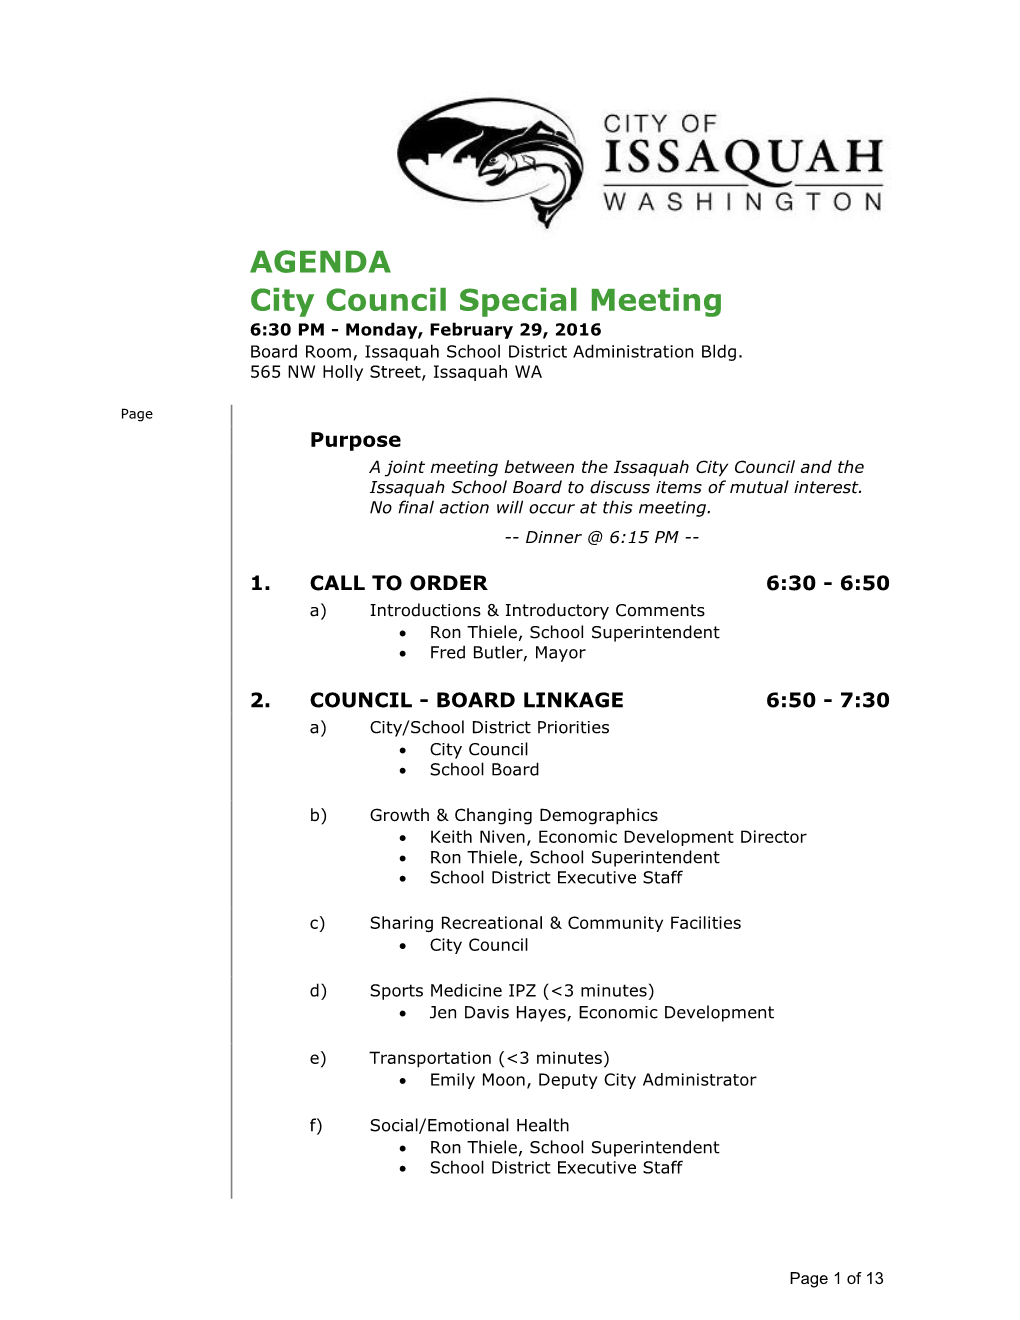 City Council Special Meeting 6:30 PM - Monday, February 29, 2016 Board Room, Issaquah School District Administration Bldg